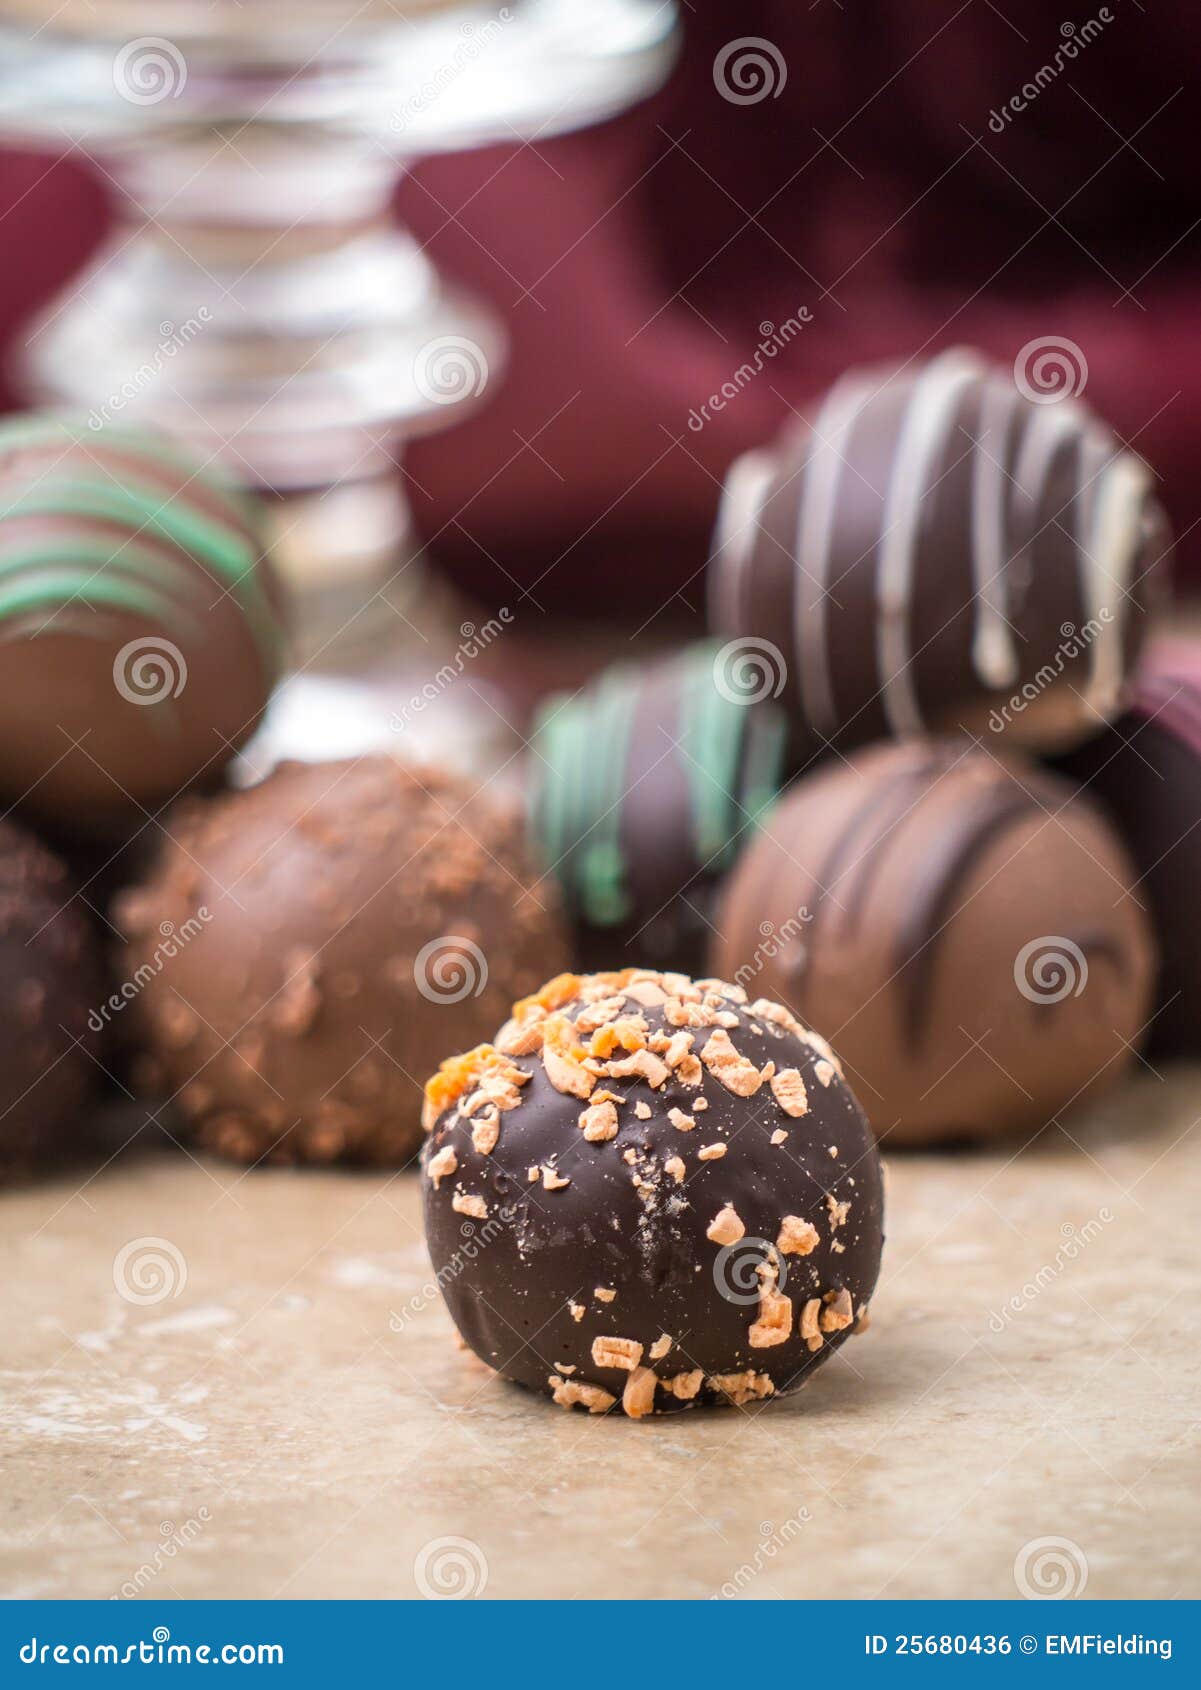 Christmas Chocolate Truffles Stock Photo - Image of candies, unhealthy ...